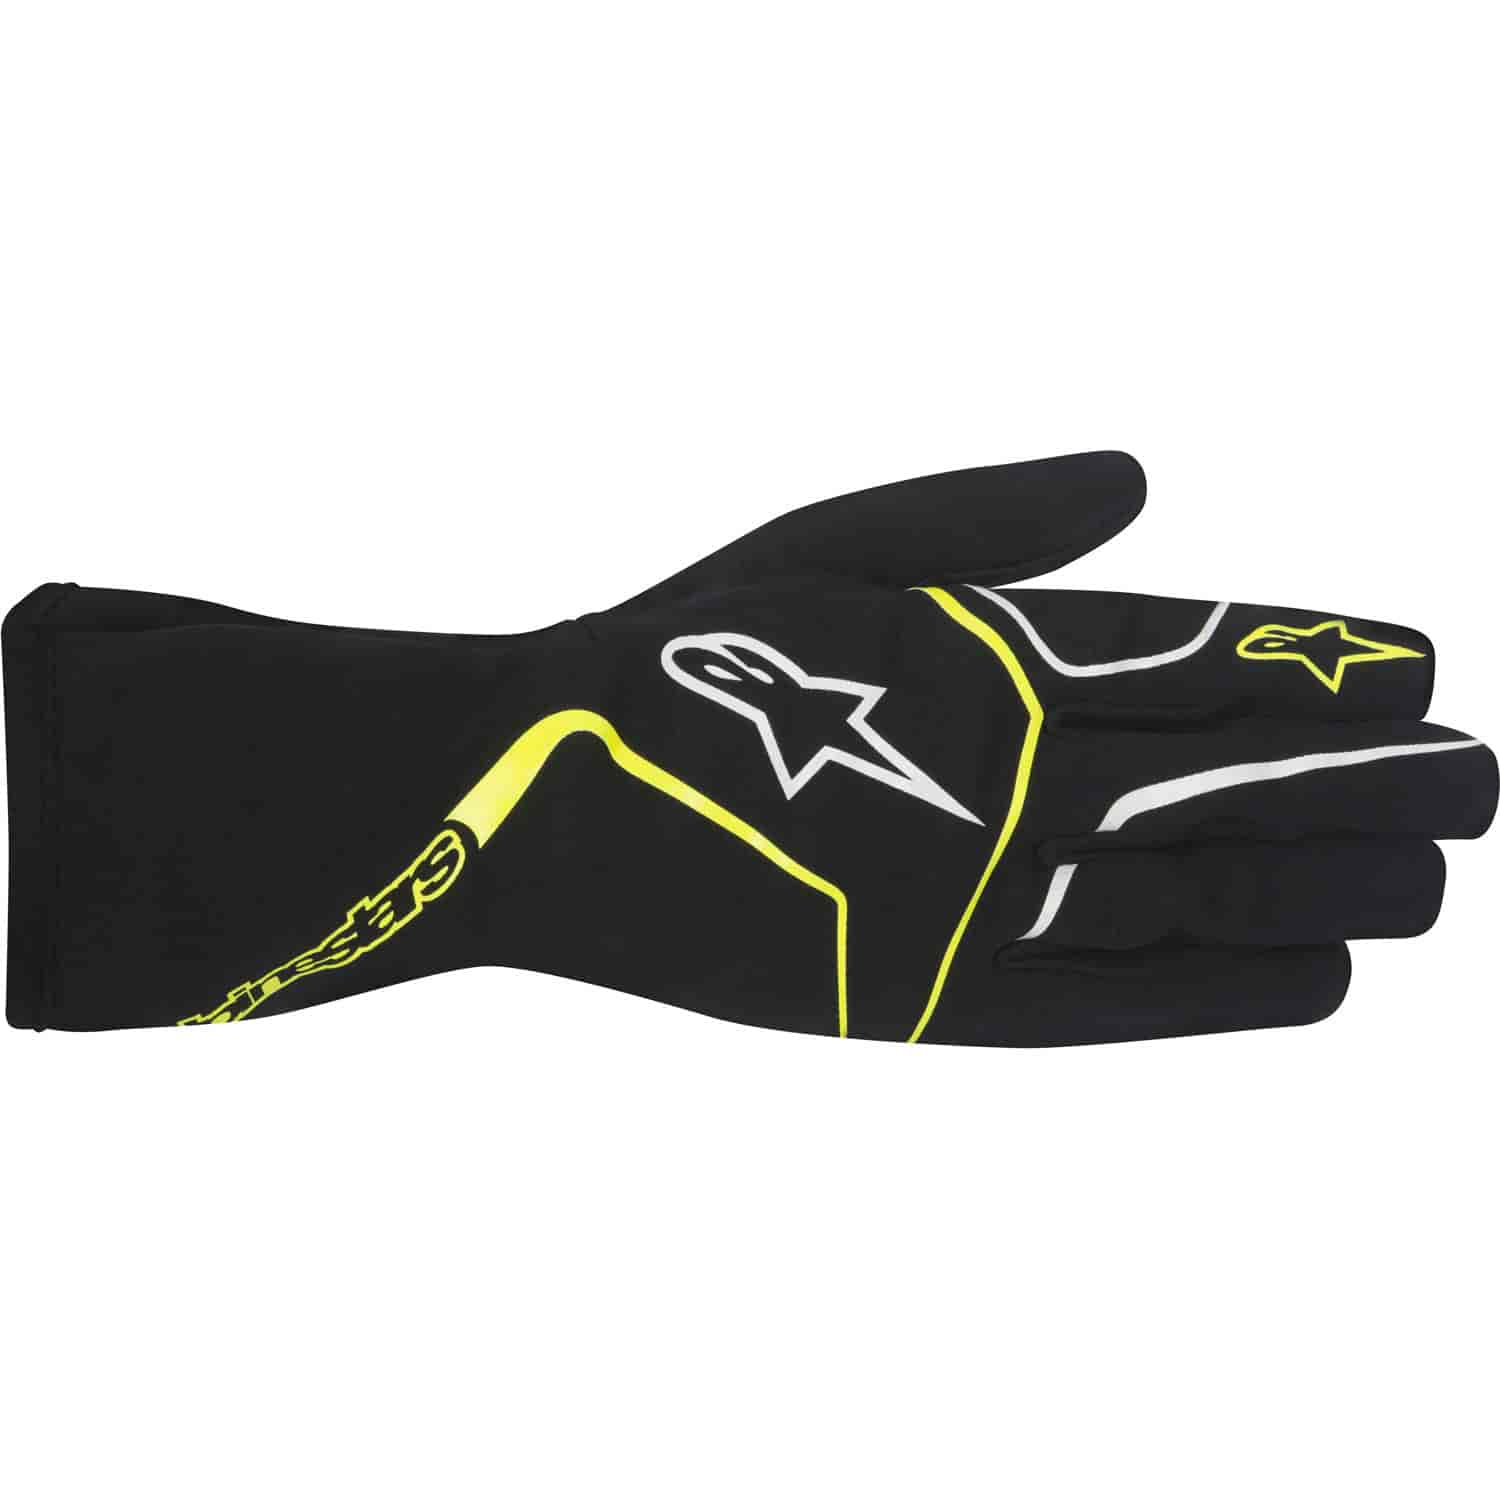 Tech 1-K Race S Youth Gloves Black/Yellow Fluorescent